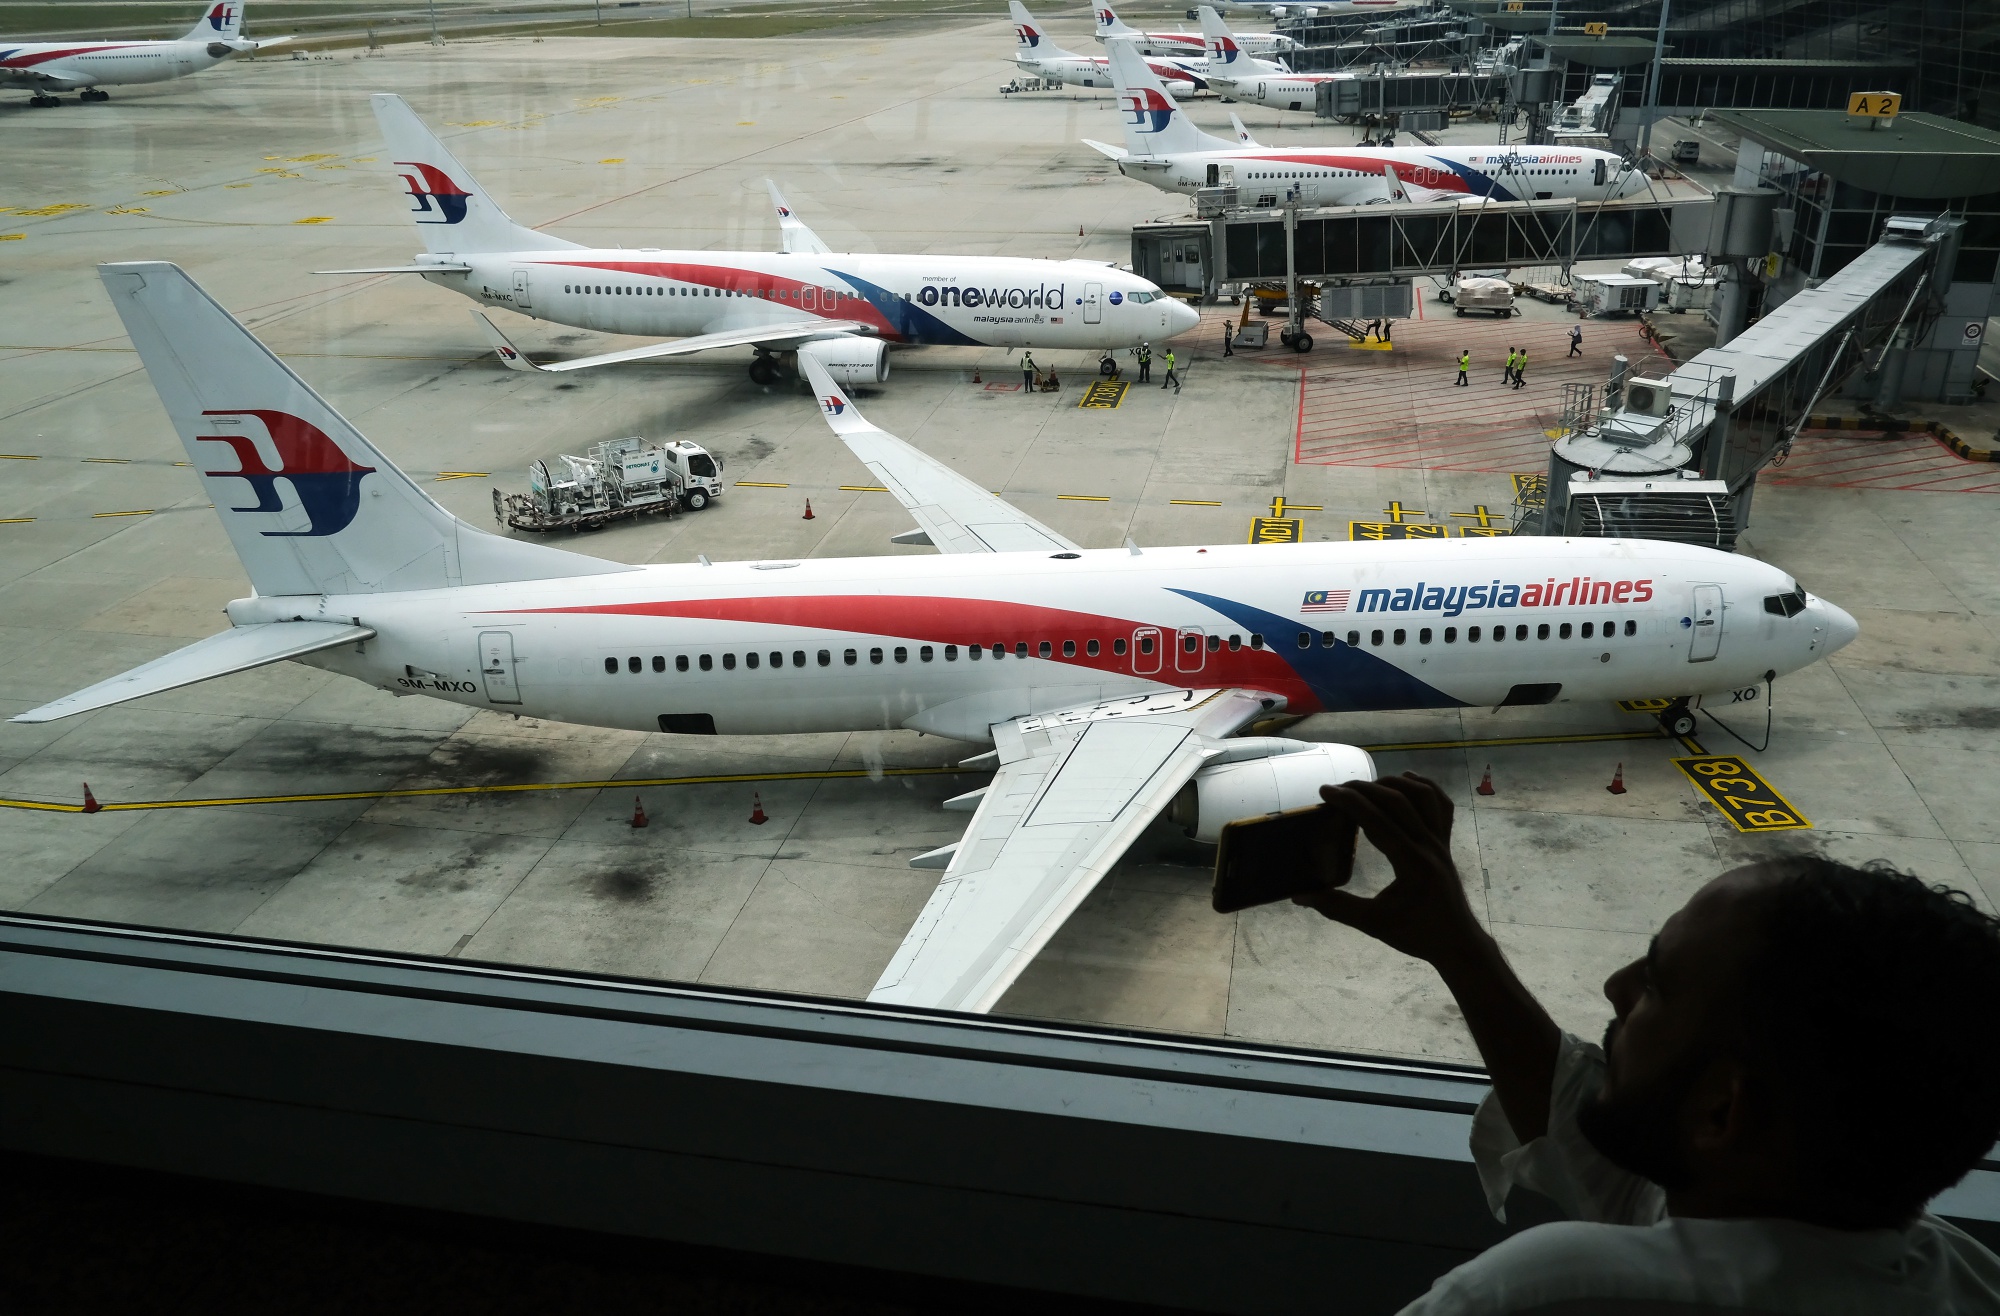 Mahathir Is Weighing Shutdown or Sale of Malaysia Airlines